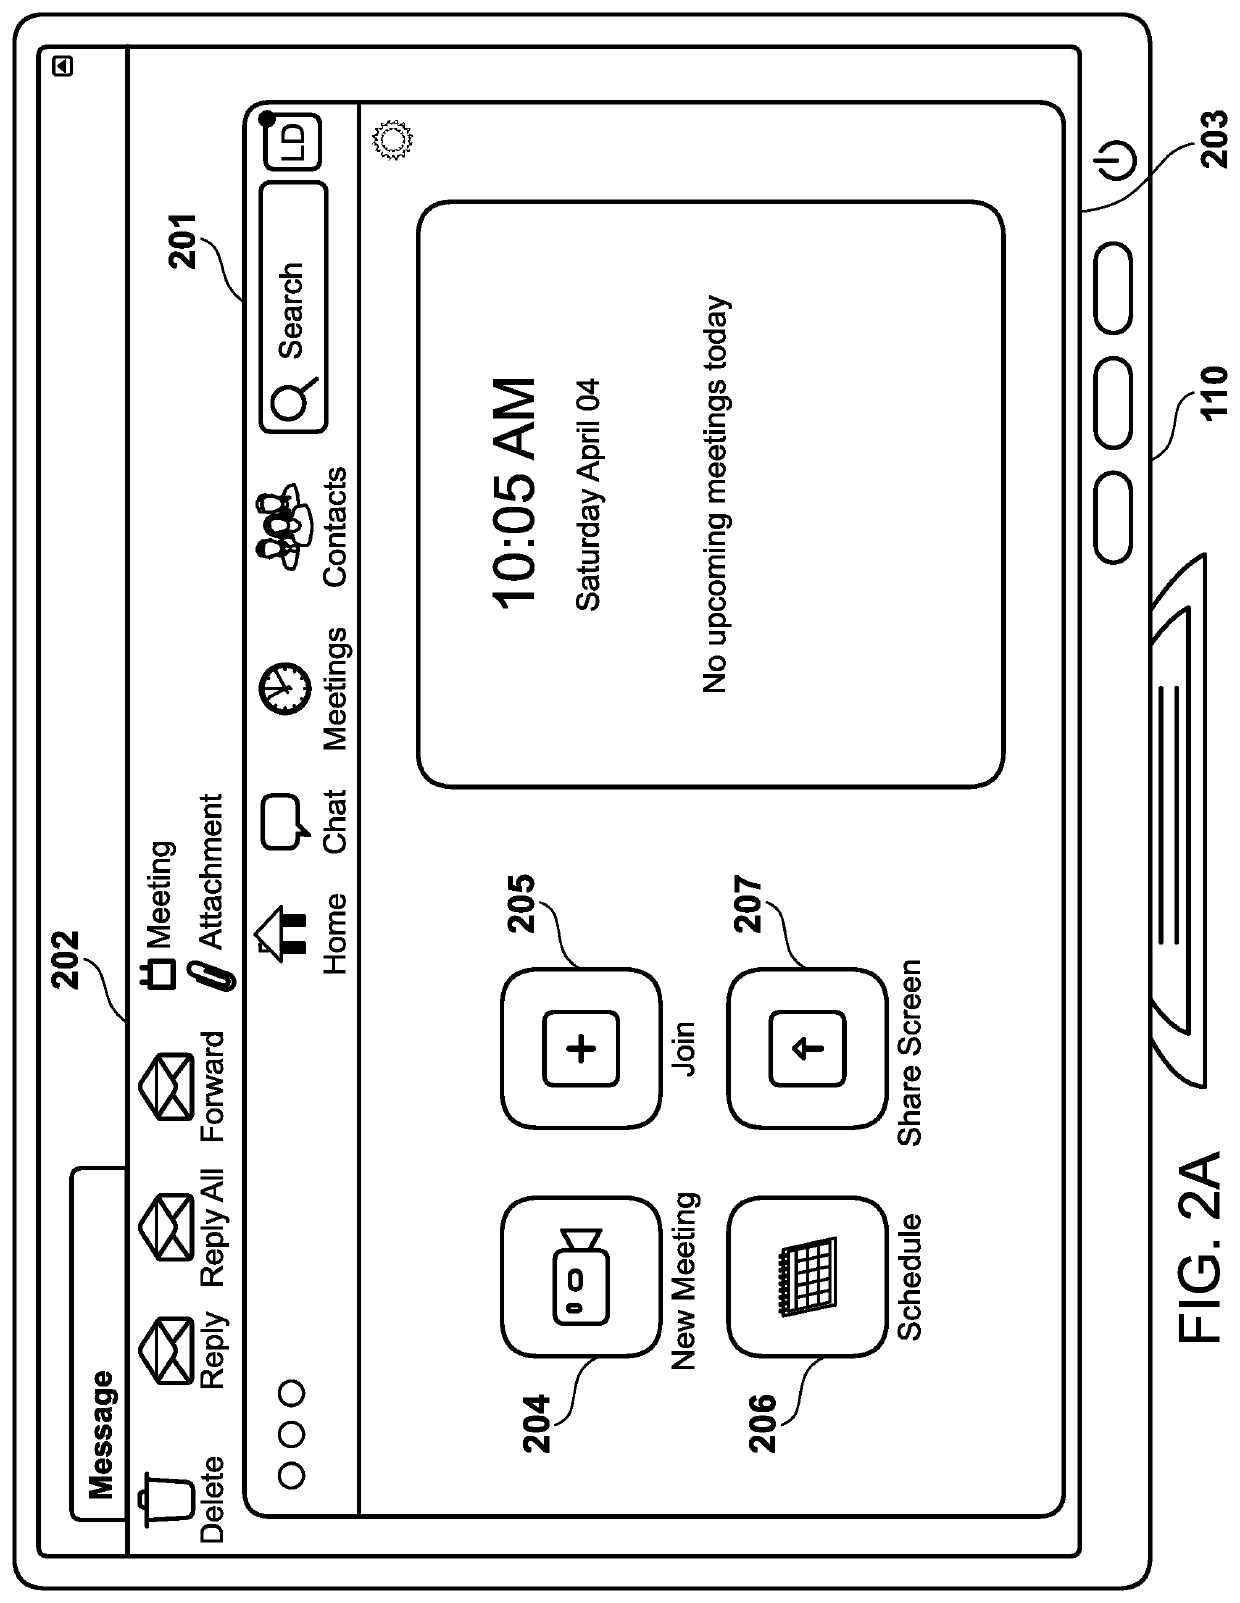 Multi-modality electronic invite routing system and process for telehealth language interpretation session